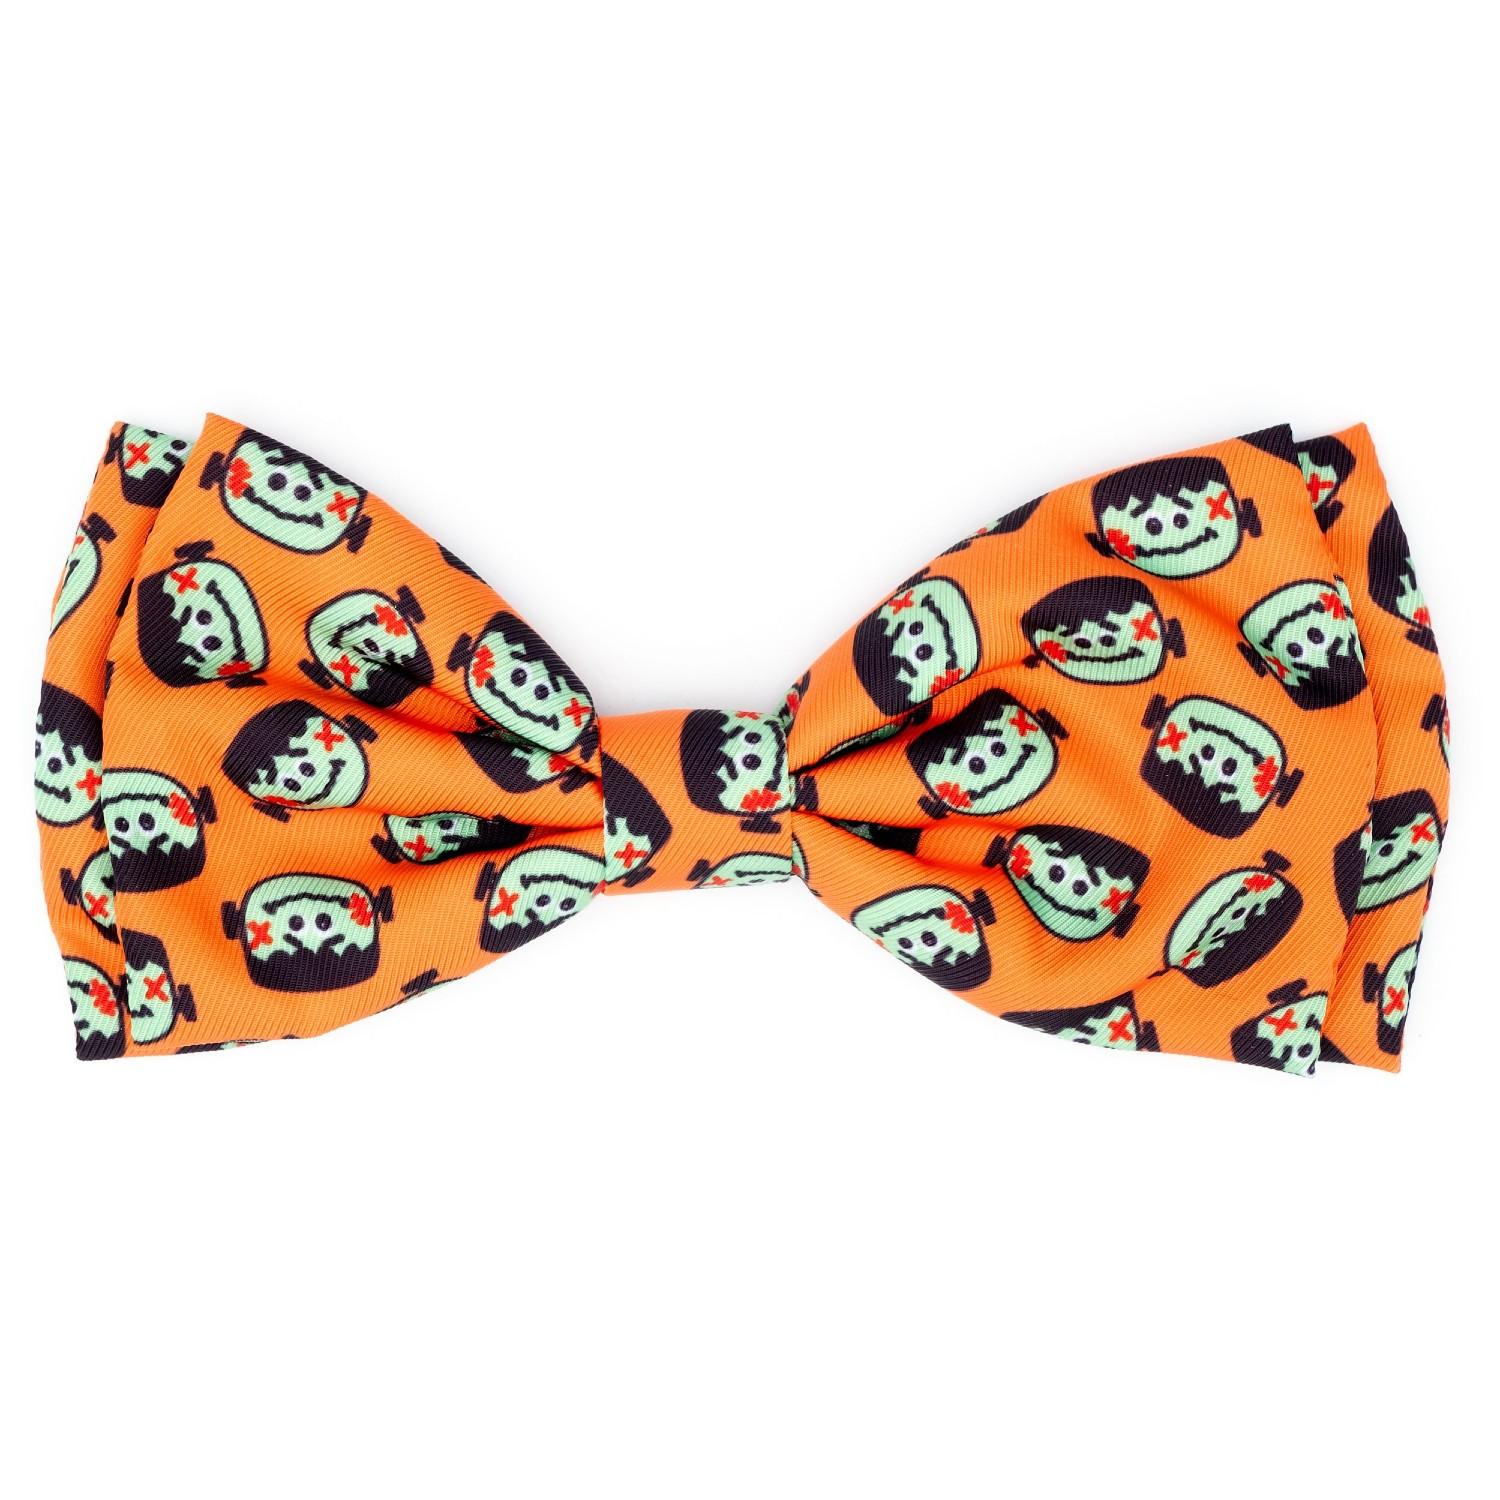 Worthy Dog Halloween Dog and Cat Bow Tie Collar Attachment - Frank